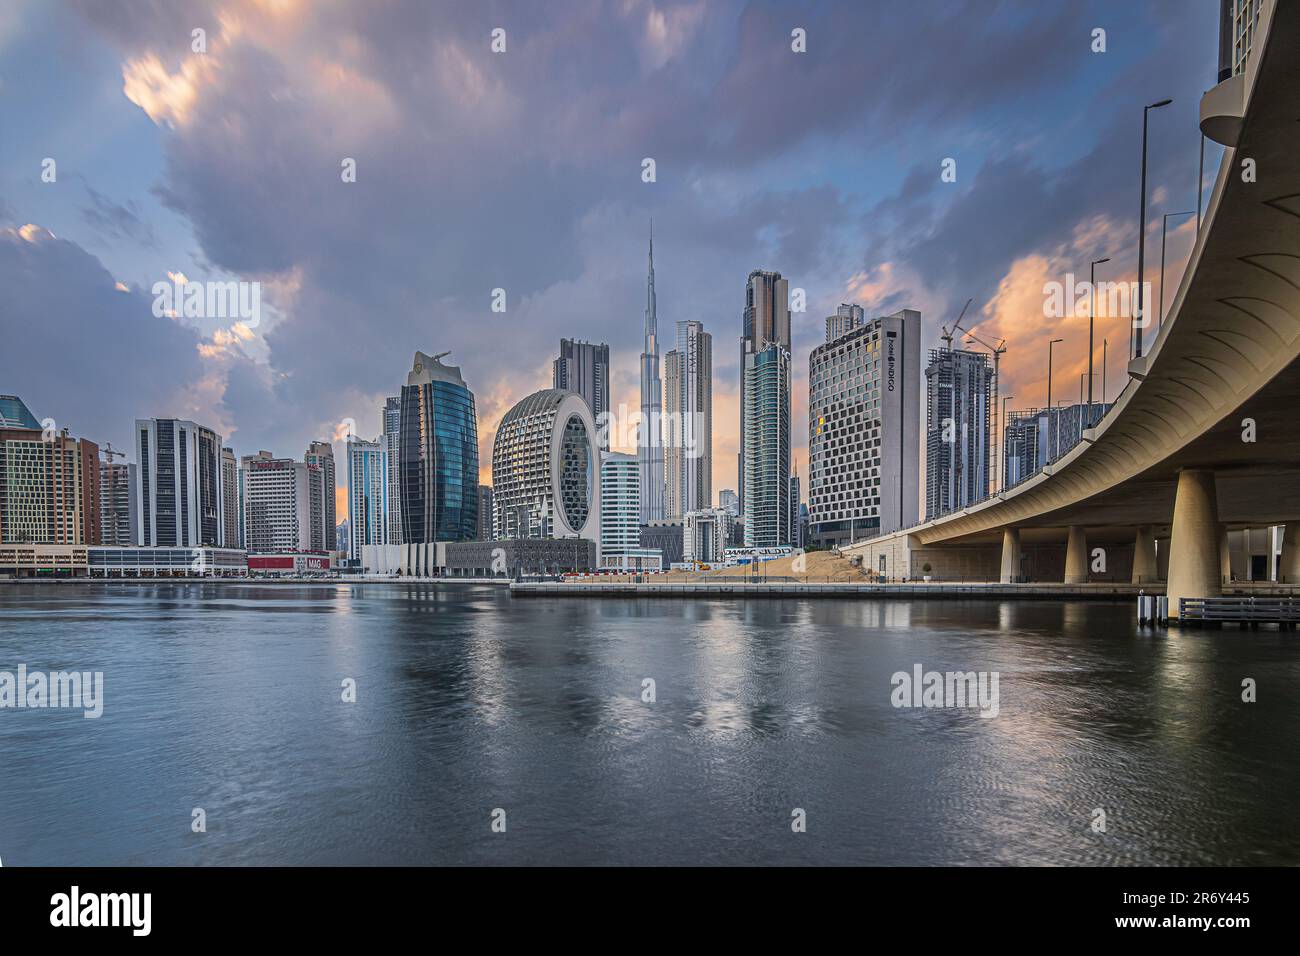 Sunset with a cloudy sky over the financial district of Dubai. City skyline in business center with office buildings and skyscrapers by Burj Khalifa Stock Photo